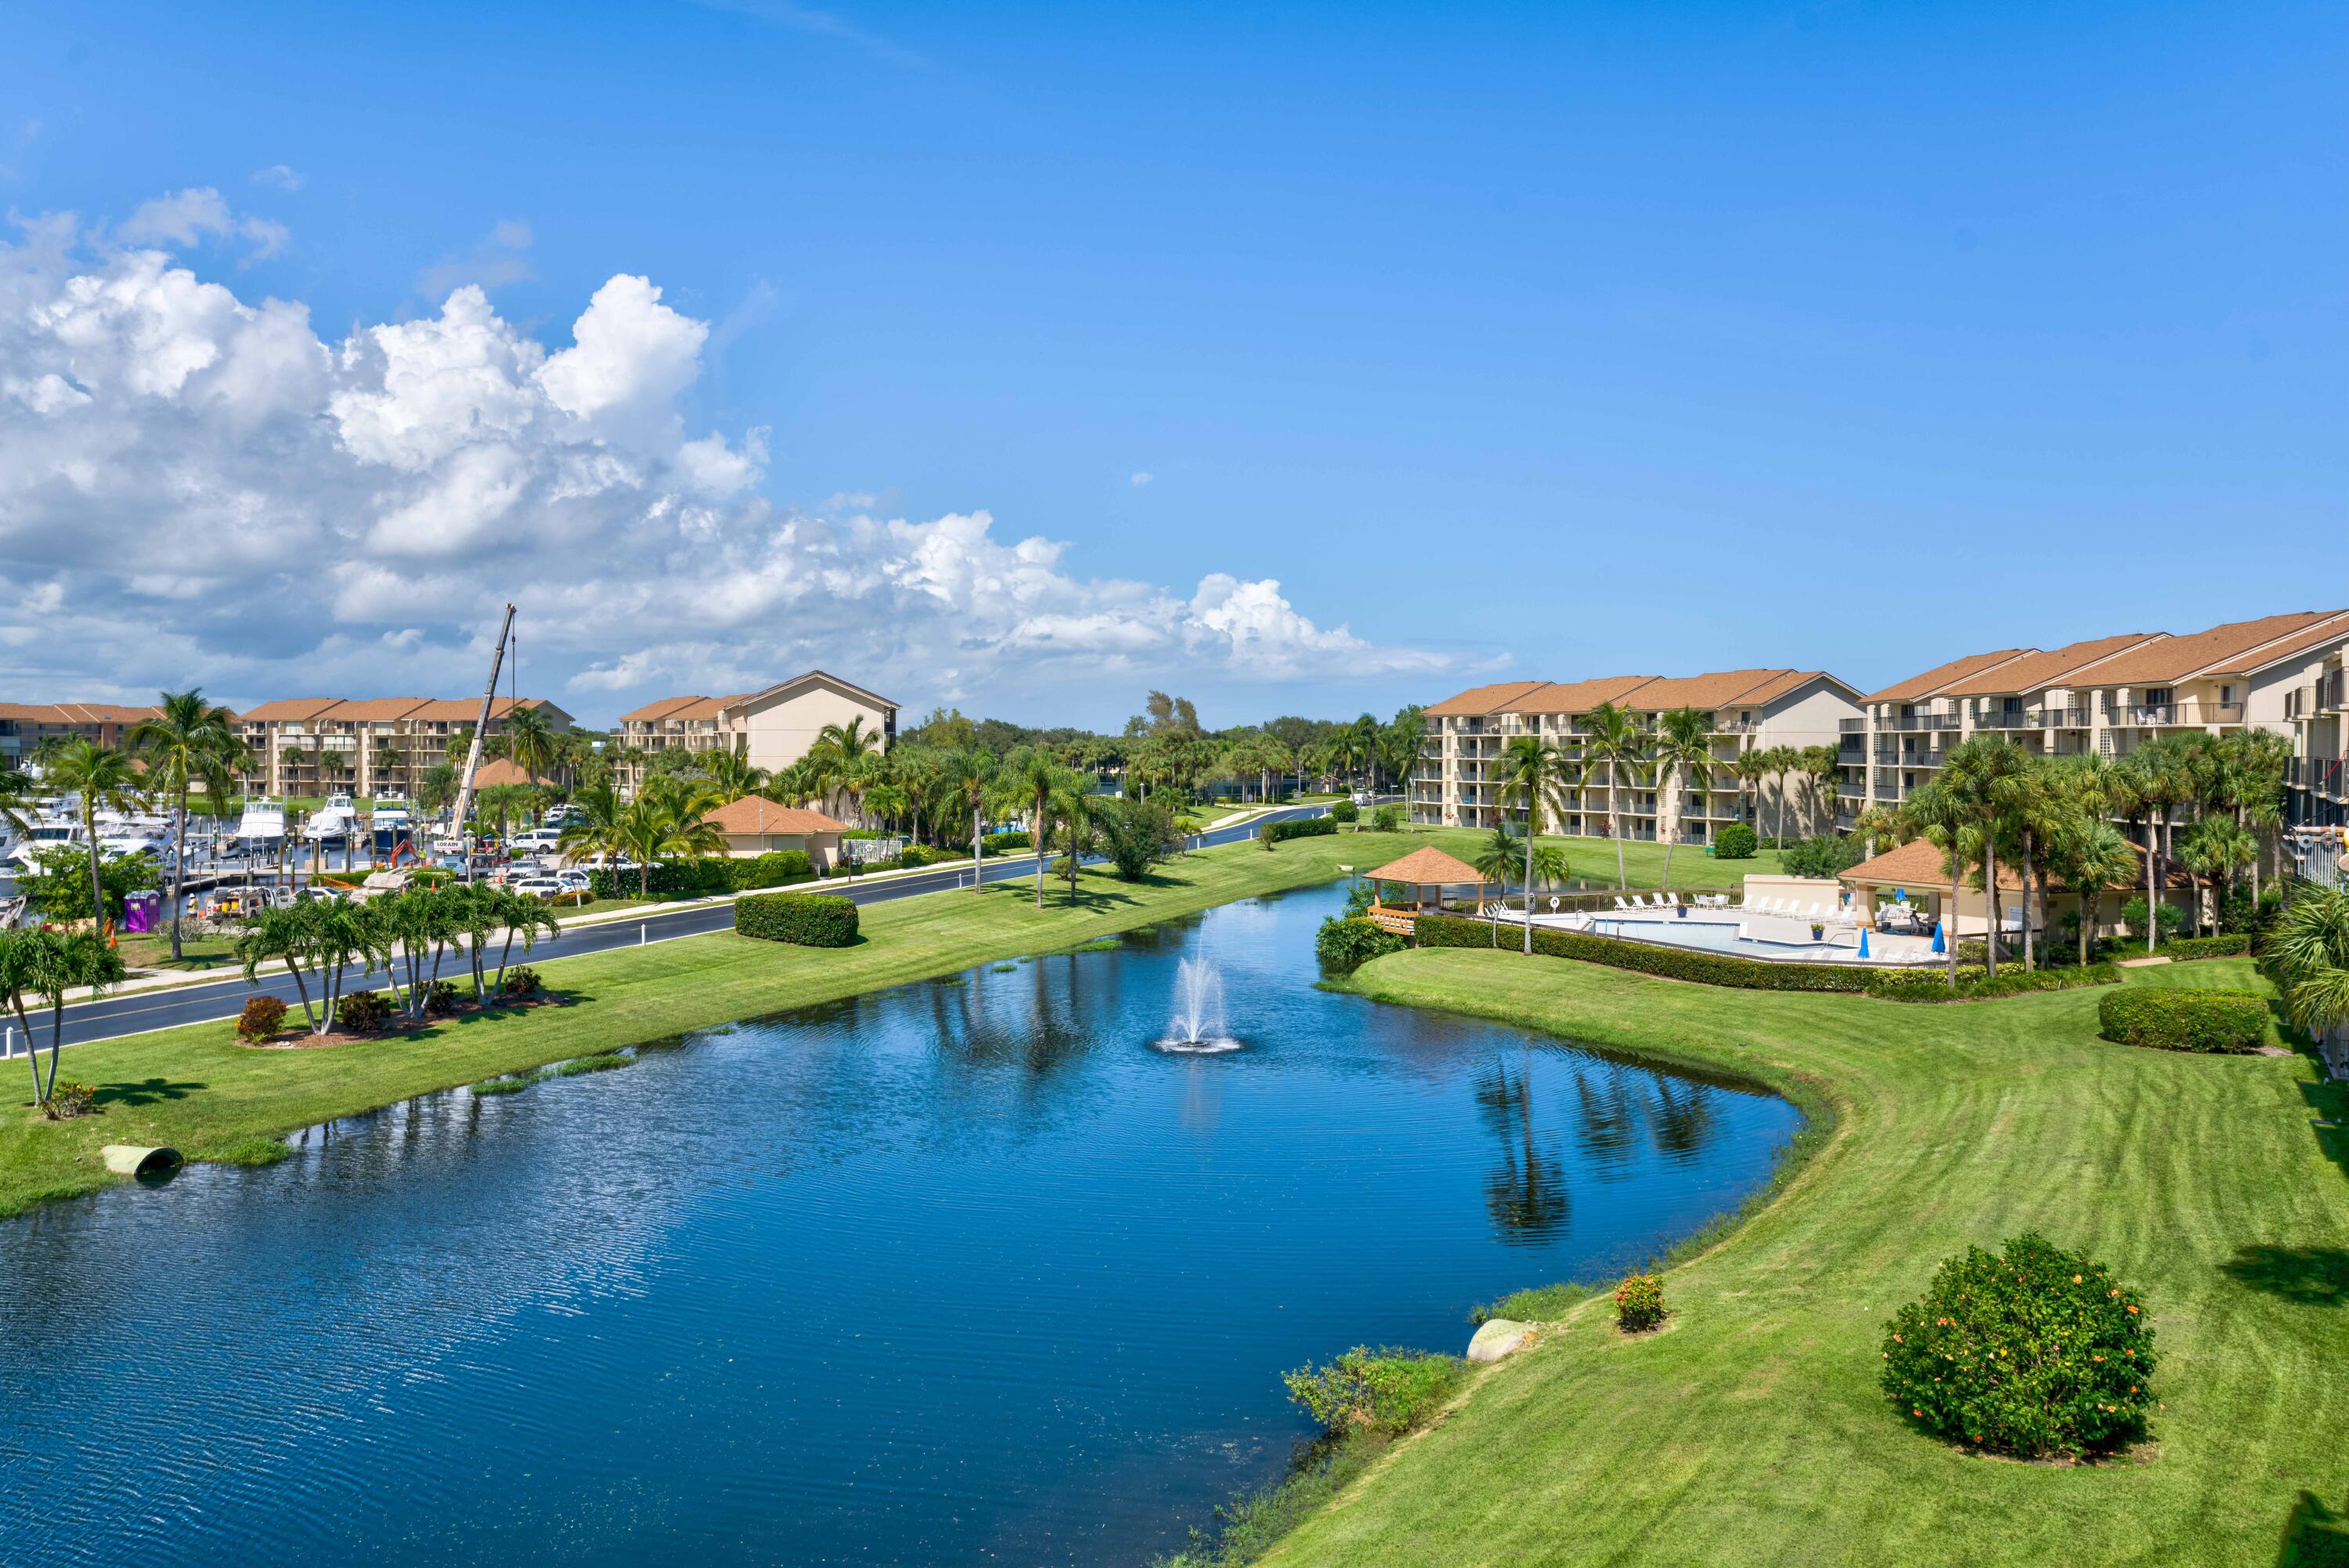 Walk to beach, supermarket, restaurants & shops. Short drive to movie theatre, golf, boating & PBI airport. This unit boasts a beautiful view of a lake and Marina.